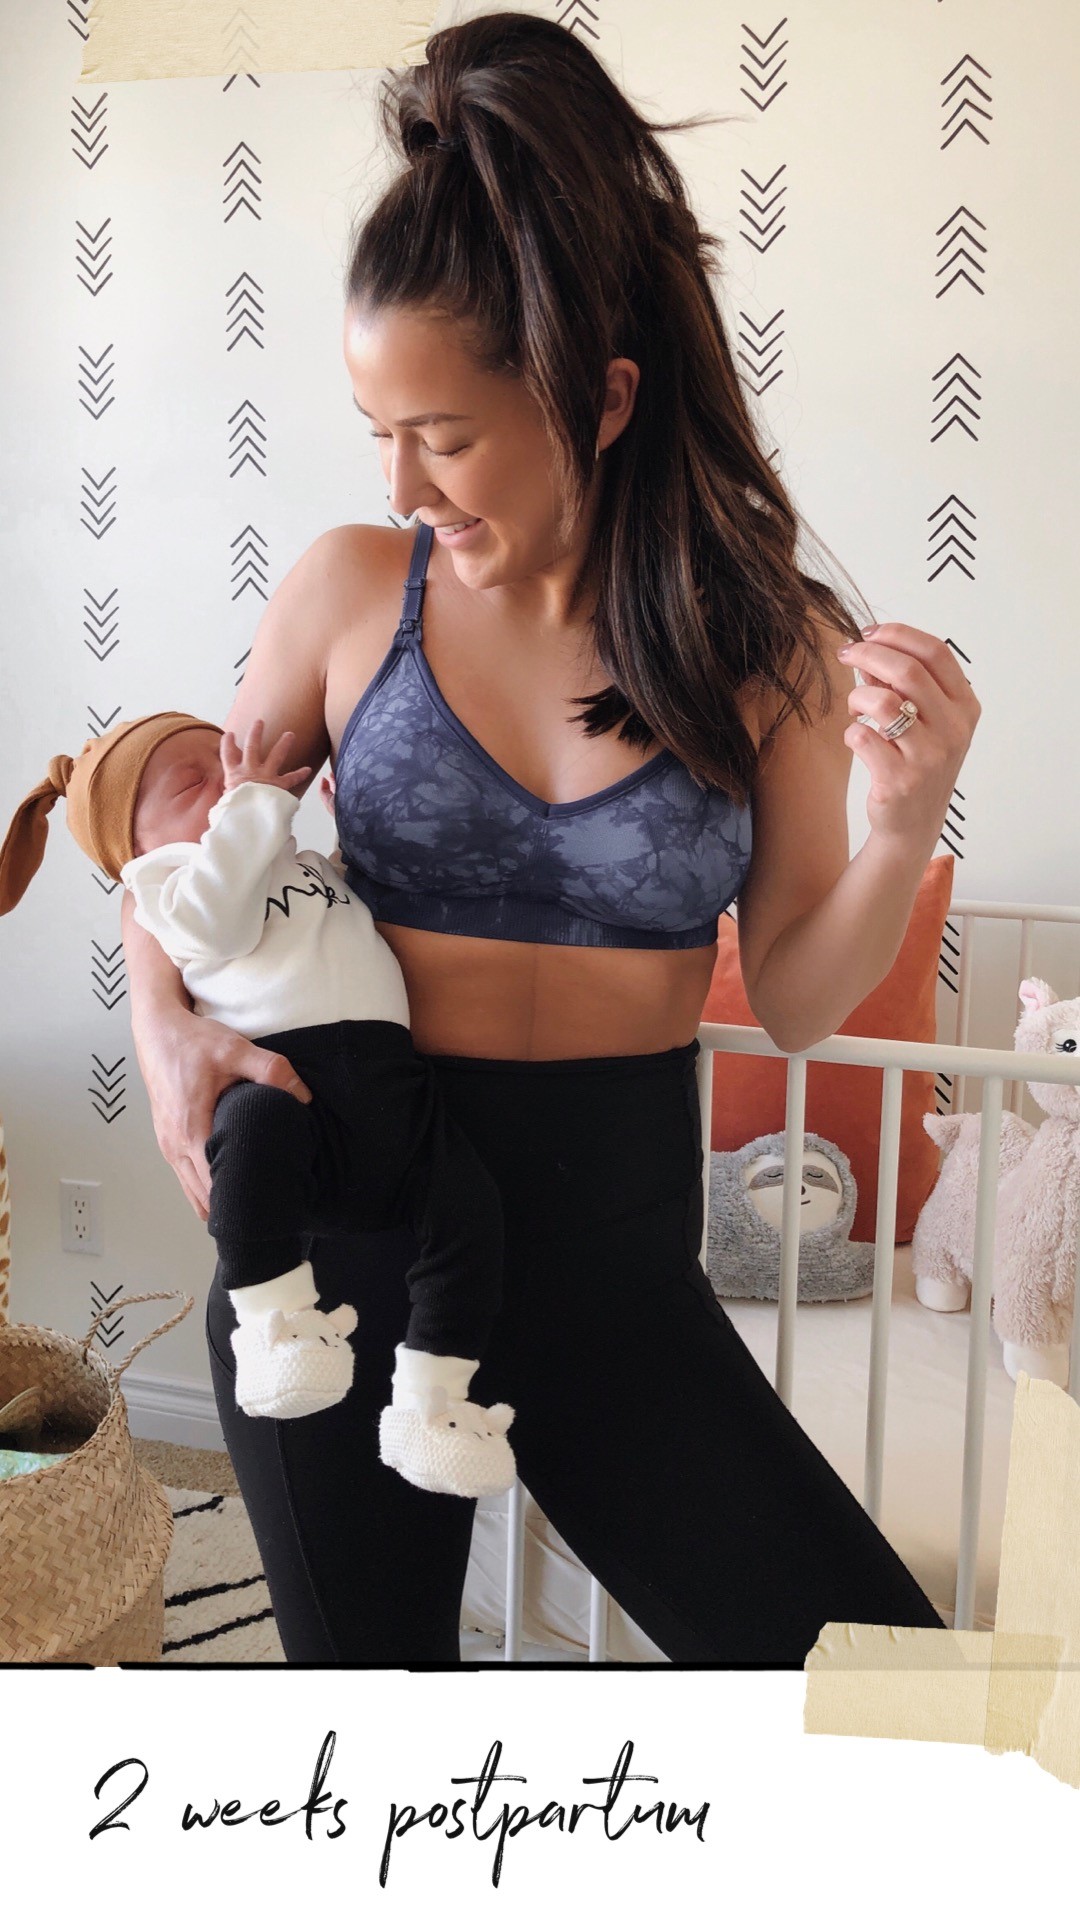 Lindsay Smith wears leggings and a sports bra while she holds her infant, looking down and smiling. 